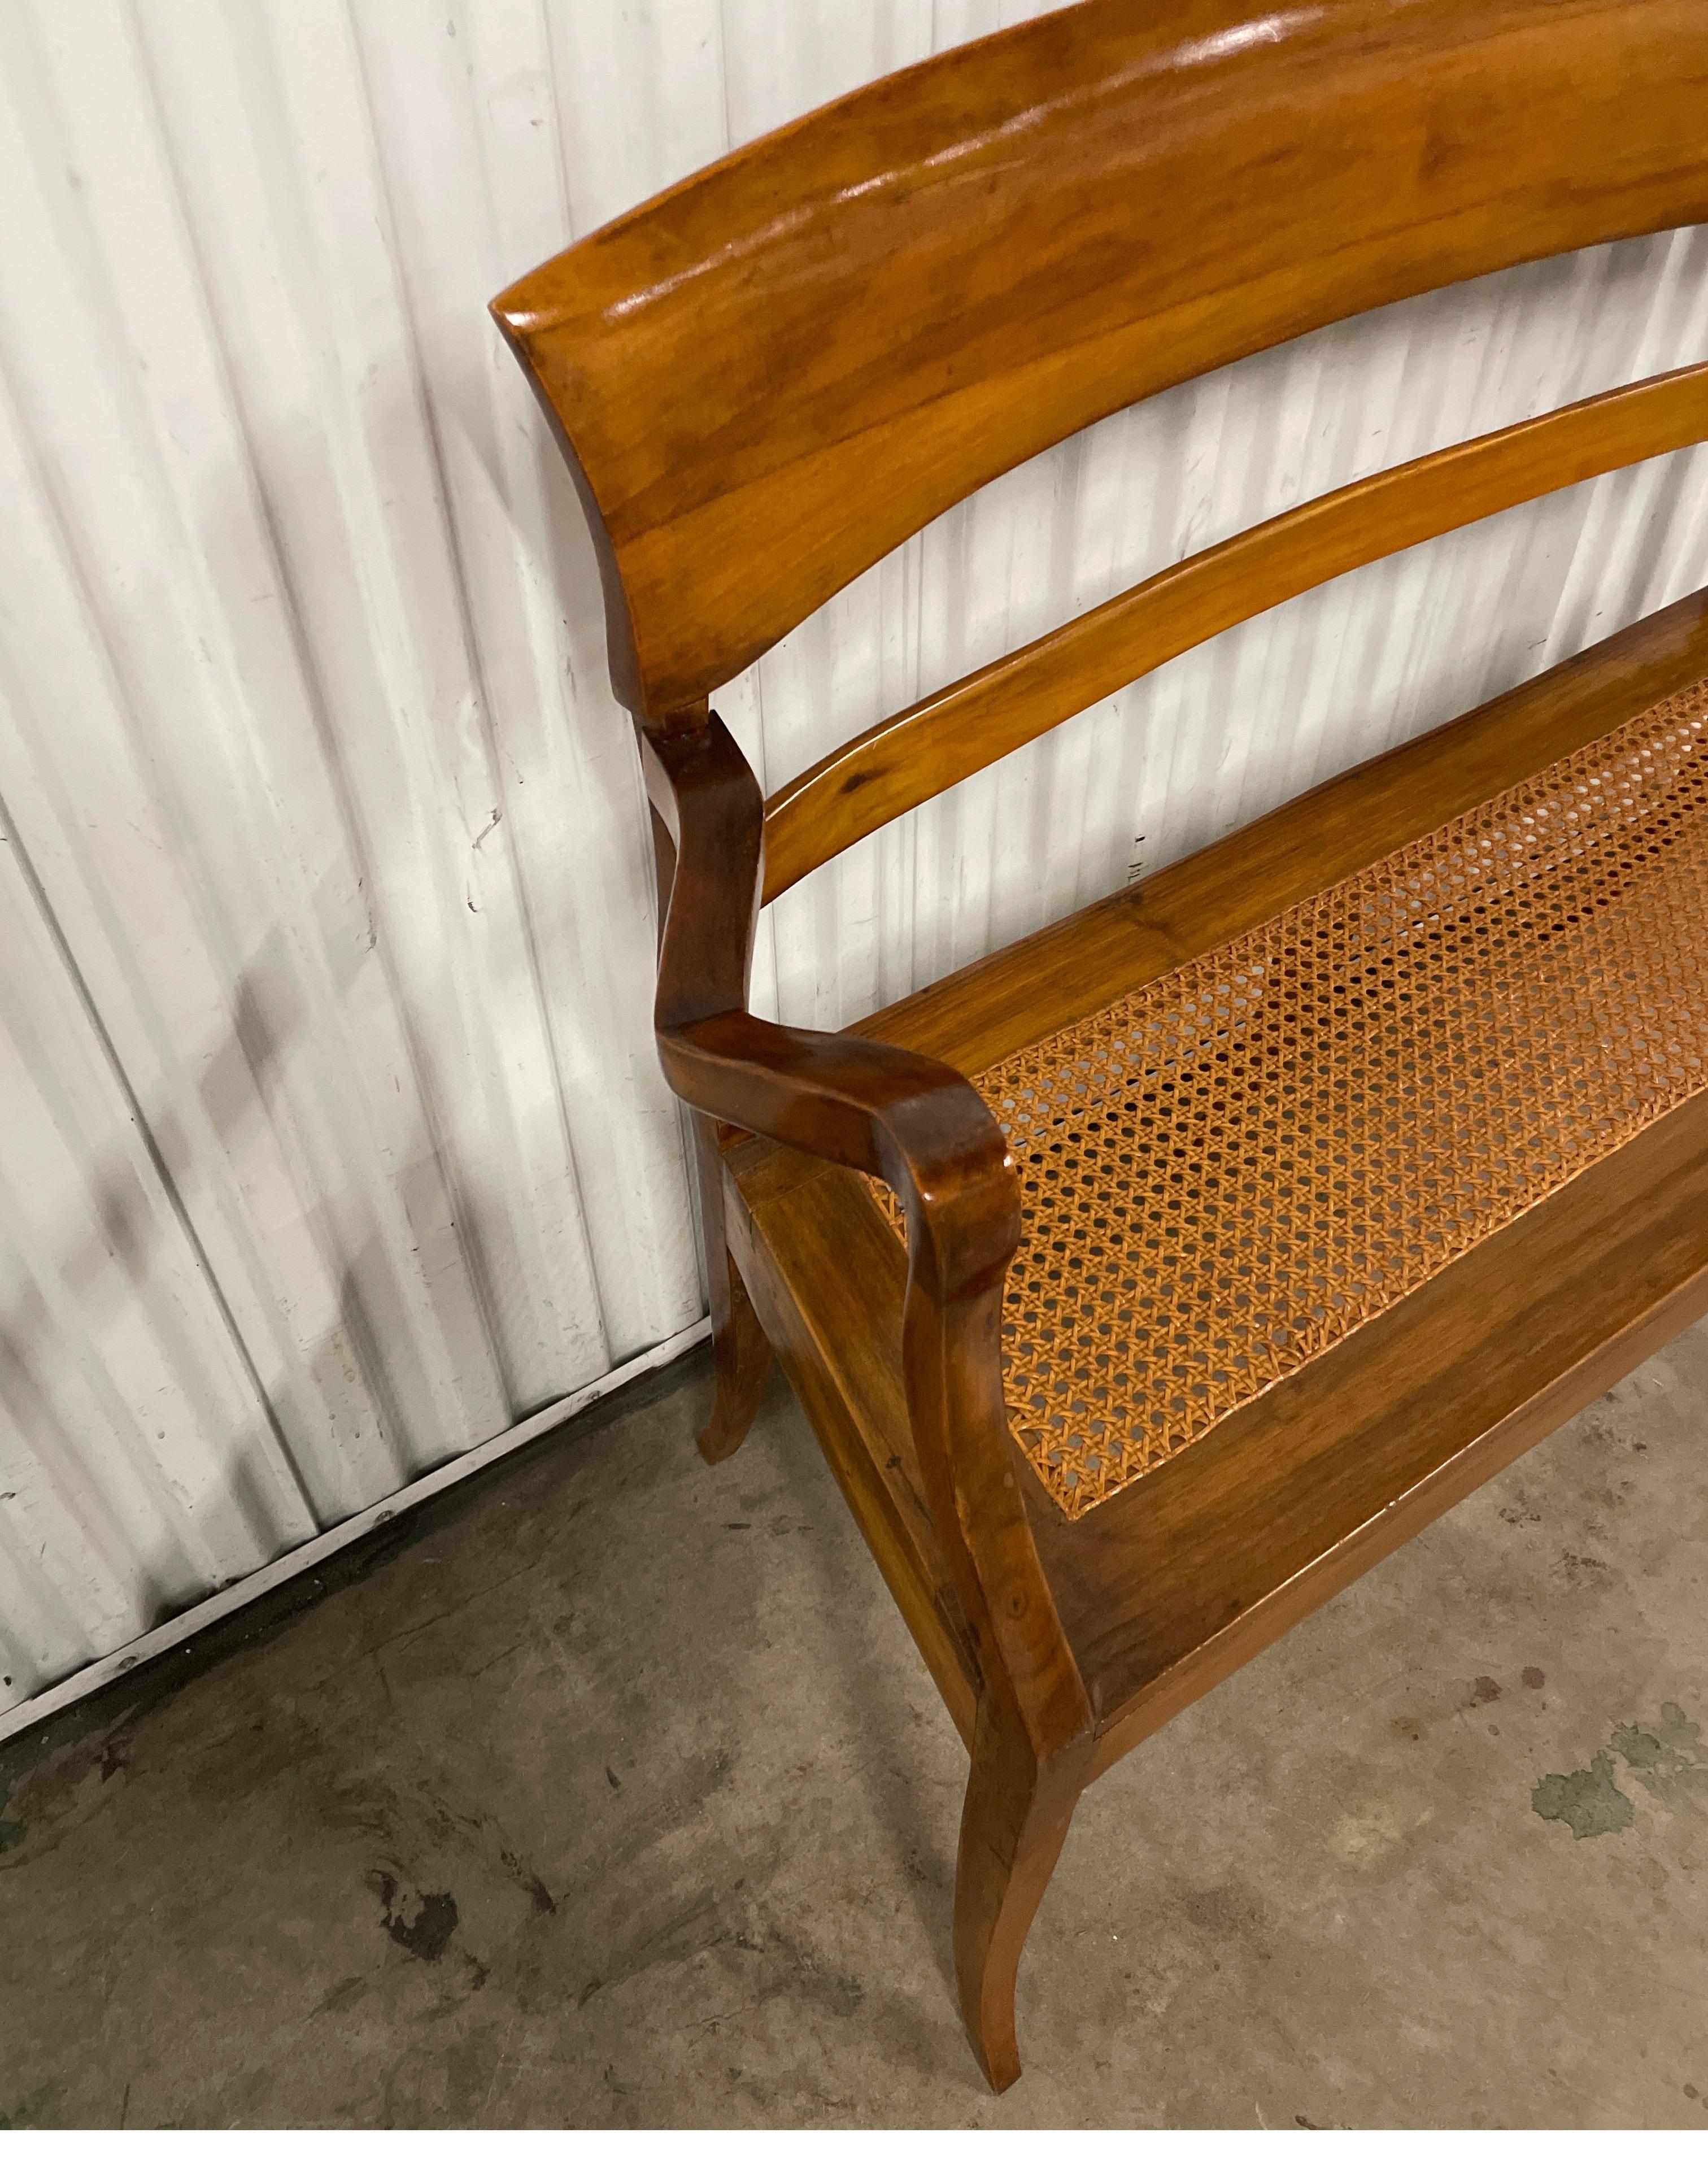 Handsome walnut and hand caned seat settee.  Perfect piece for an entryway. Use as is or add your own seat cushion.